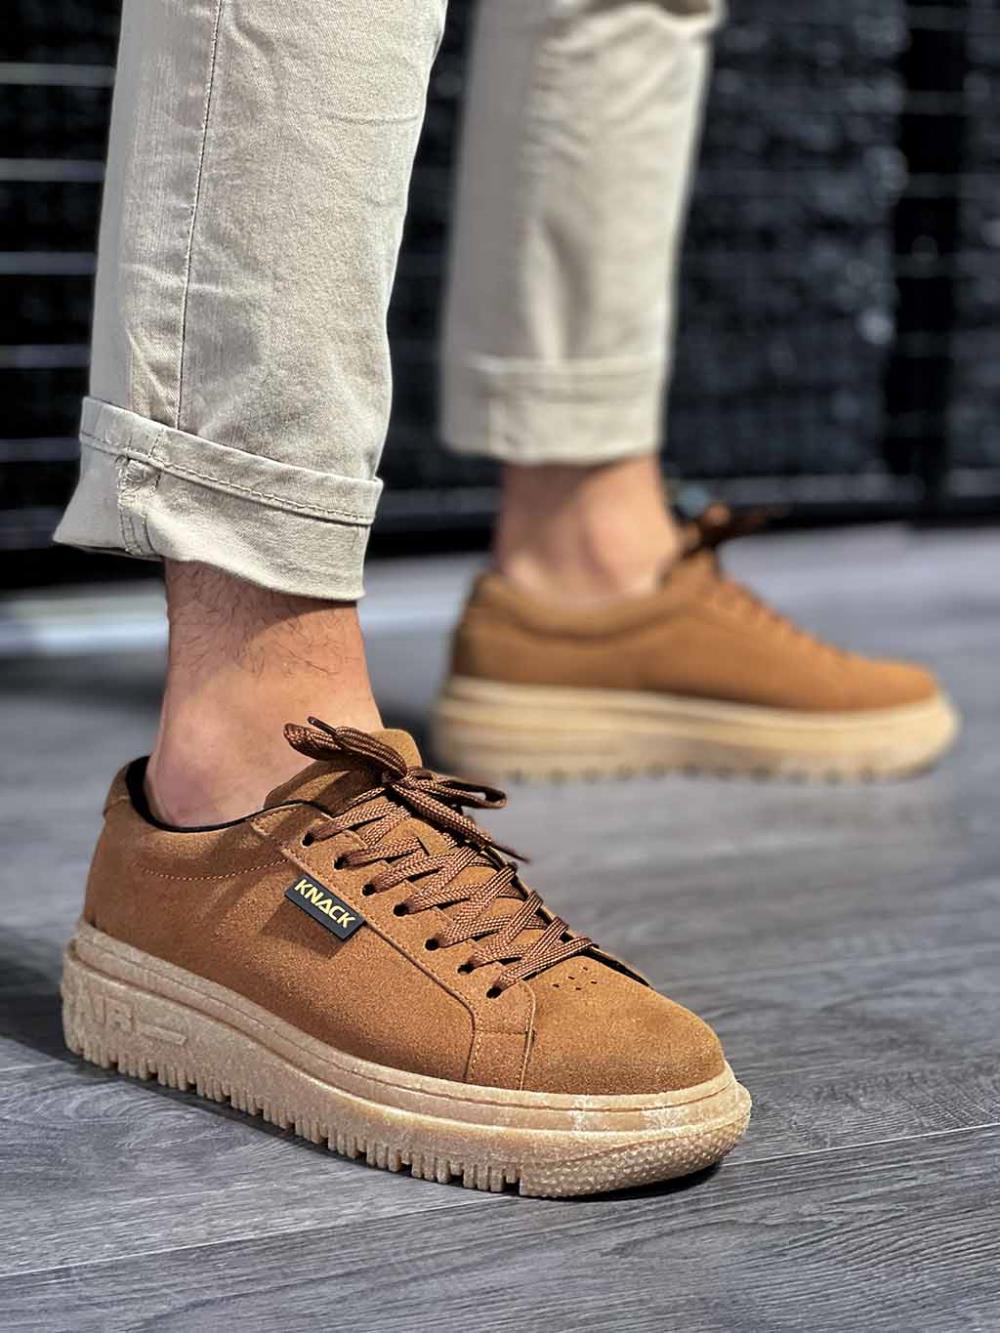 Men's Casual Shoes sneakers 225 Tan Suede - STREETMODE ™